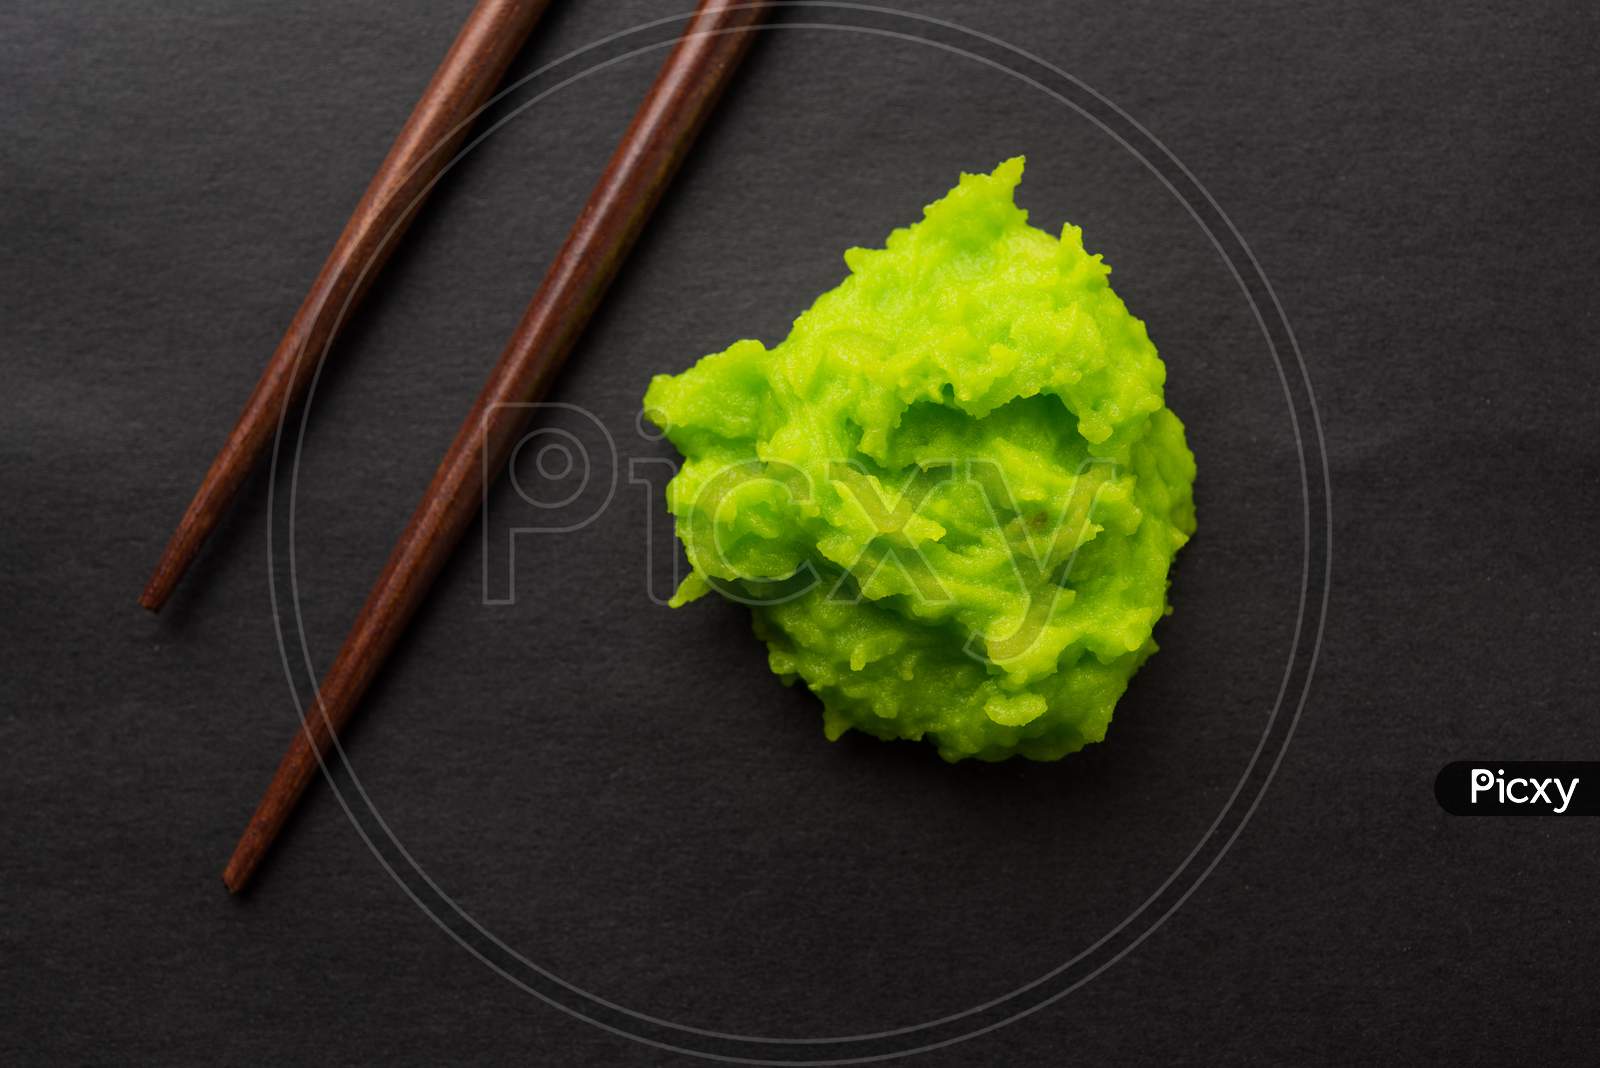 Image of Green wasabi sauce or paste in bowlNR612374Picxy